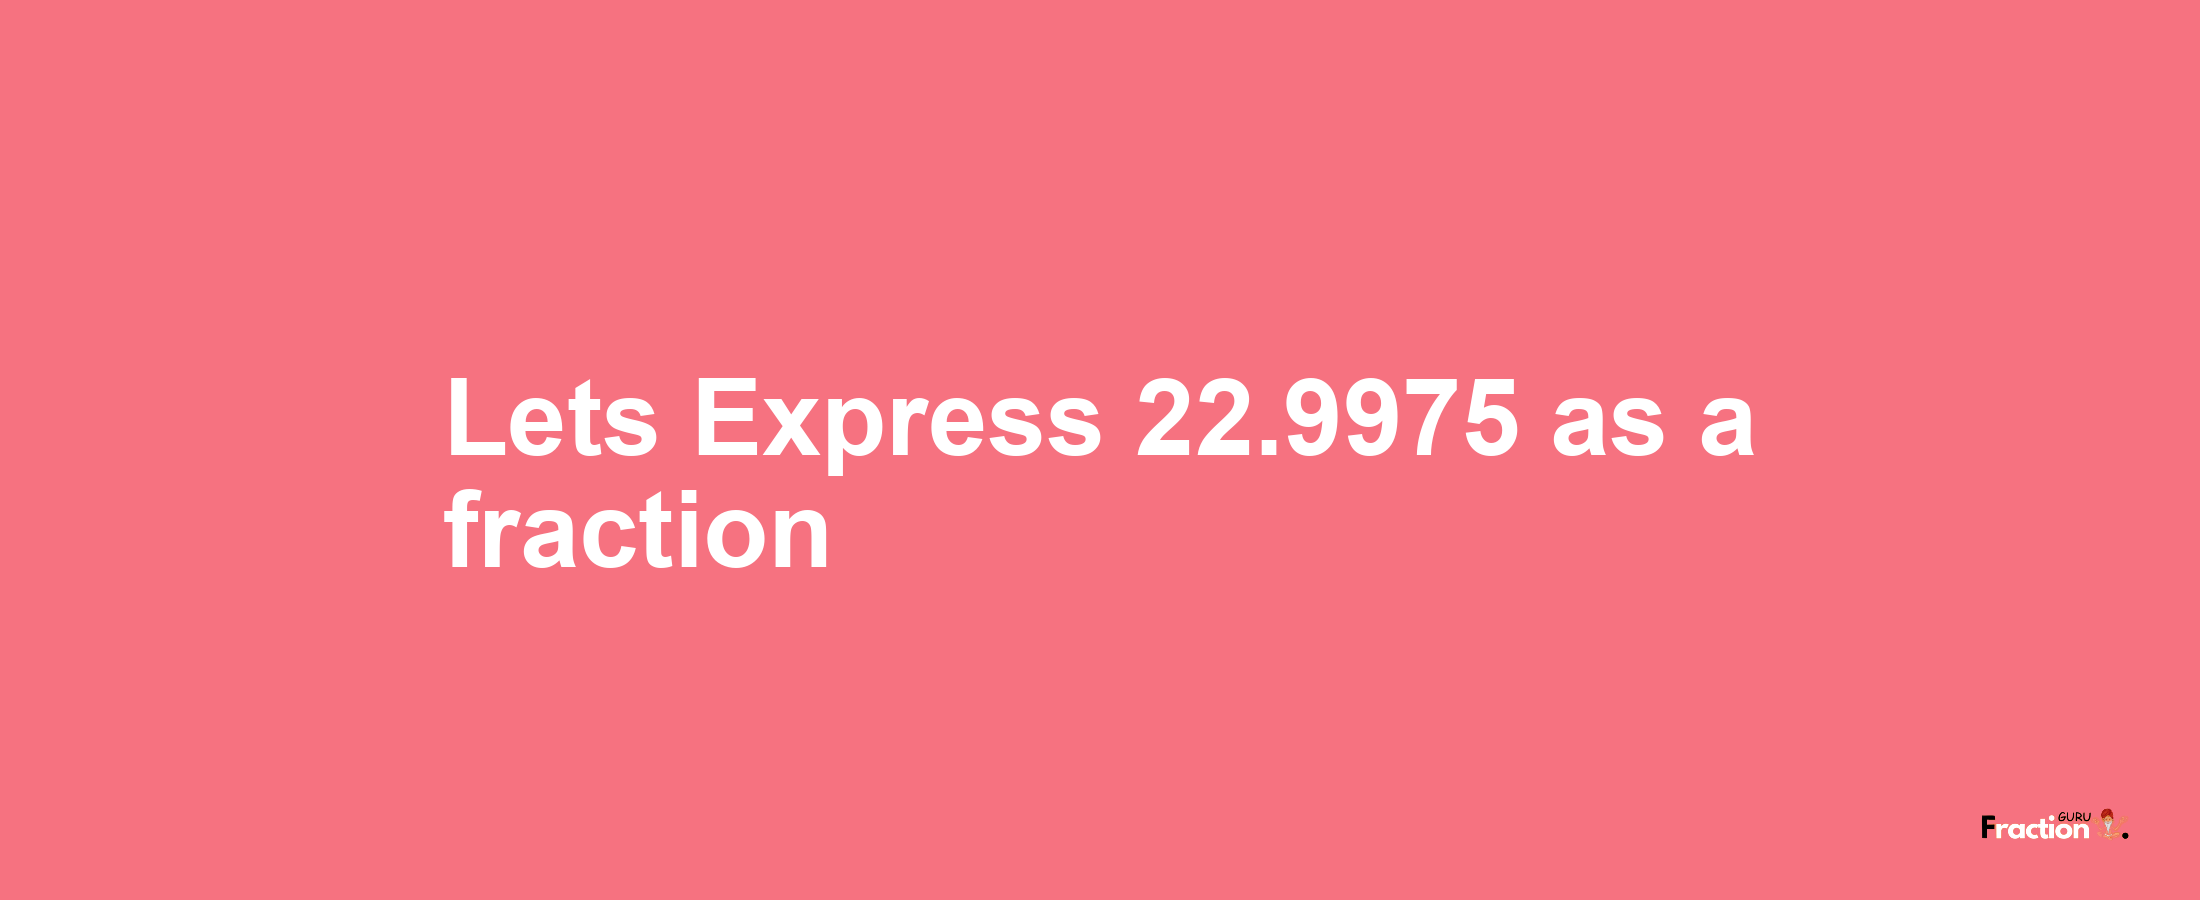 Lets Express 22.9975 as afraction